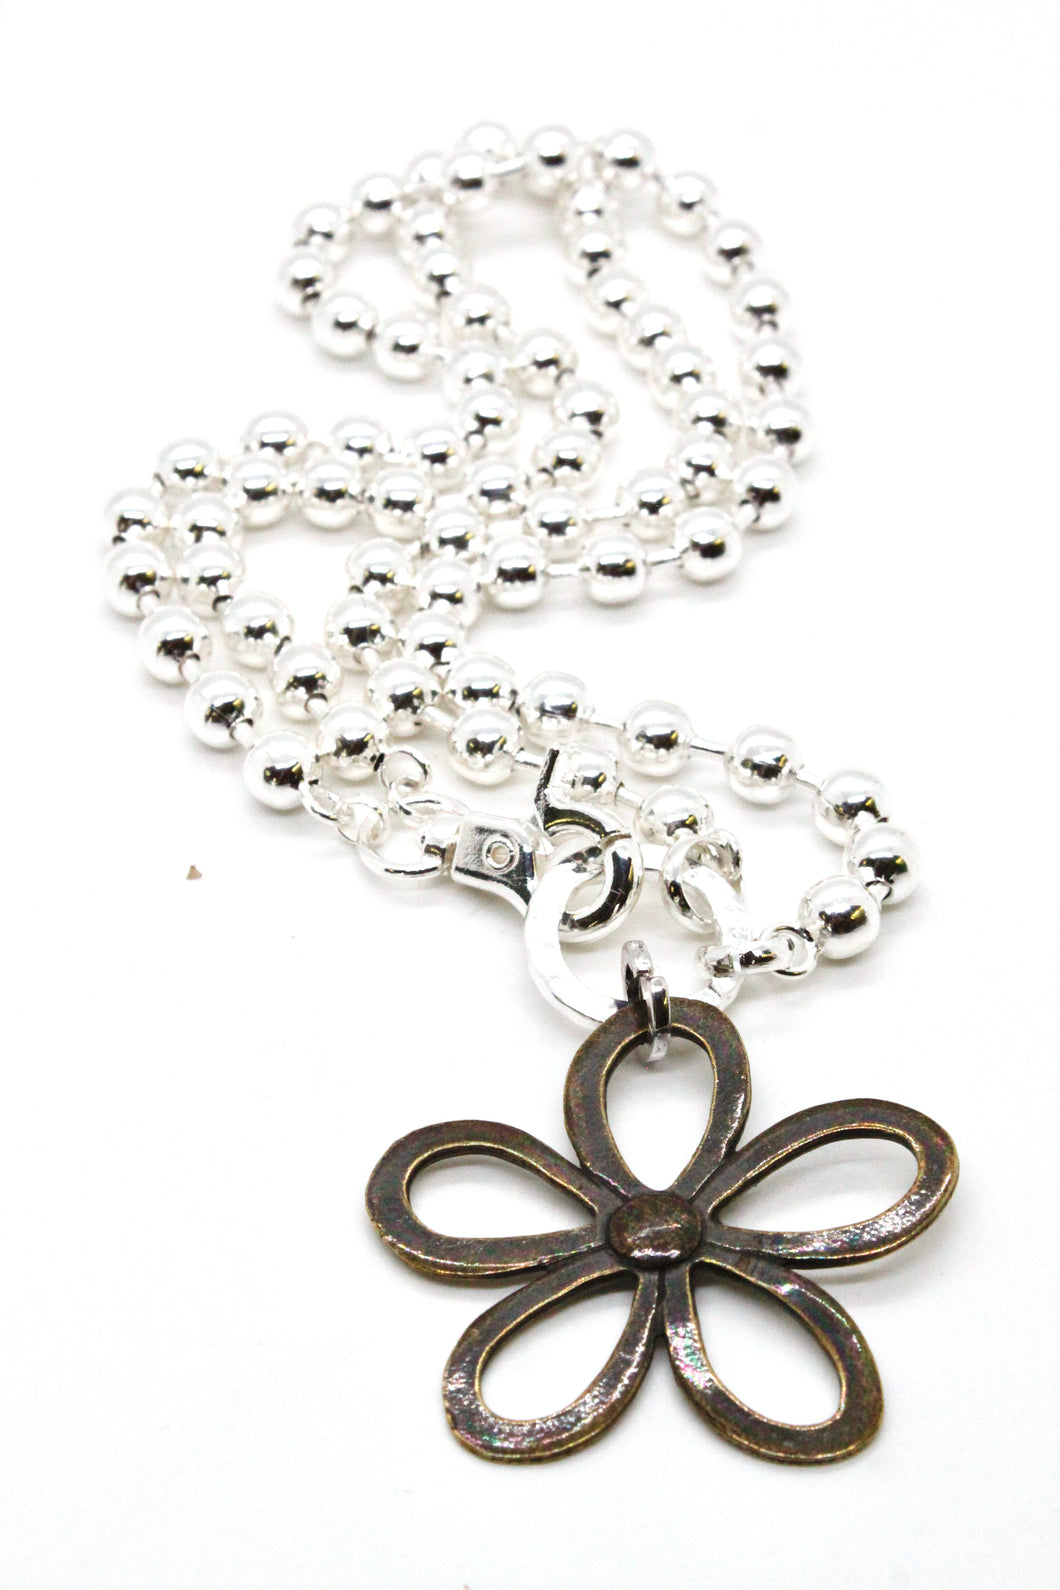 Convertible Short or Long Ball Chain Necklace with Large Brass Daisy Flower -The Classics Collection- N2-265G